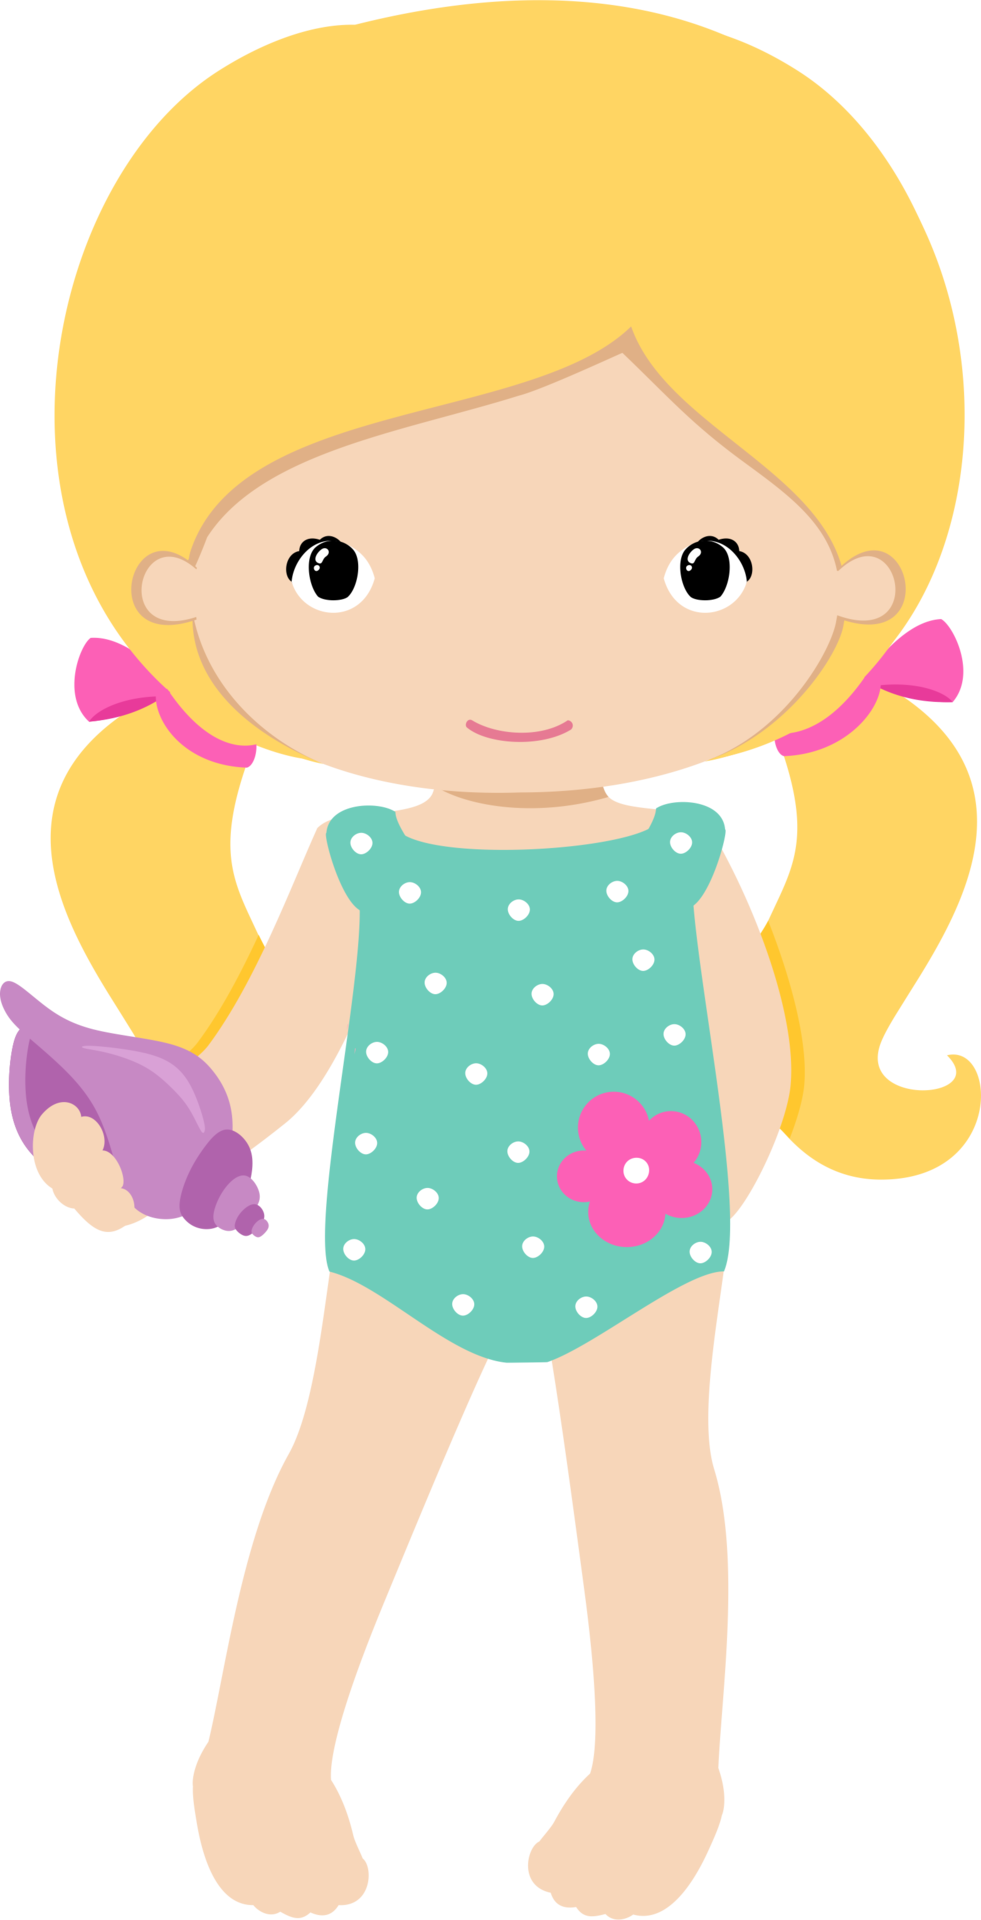 Clipart beach baby, Clipart beach baby Transparent FREE for.